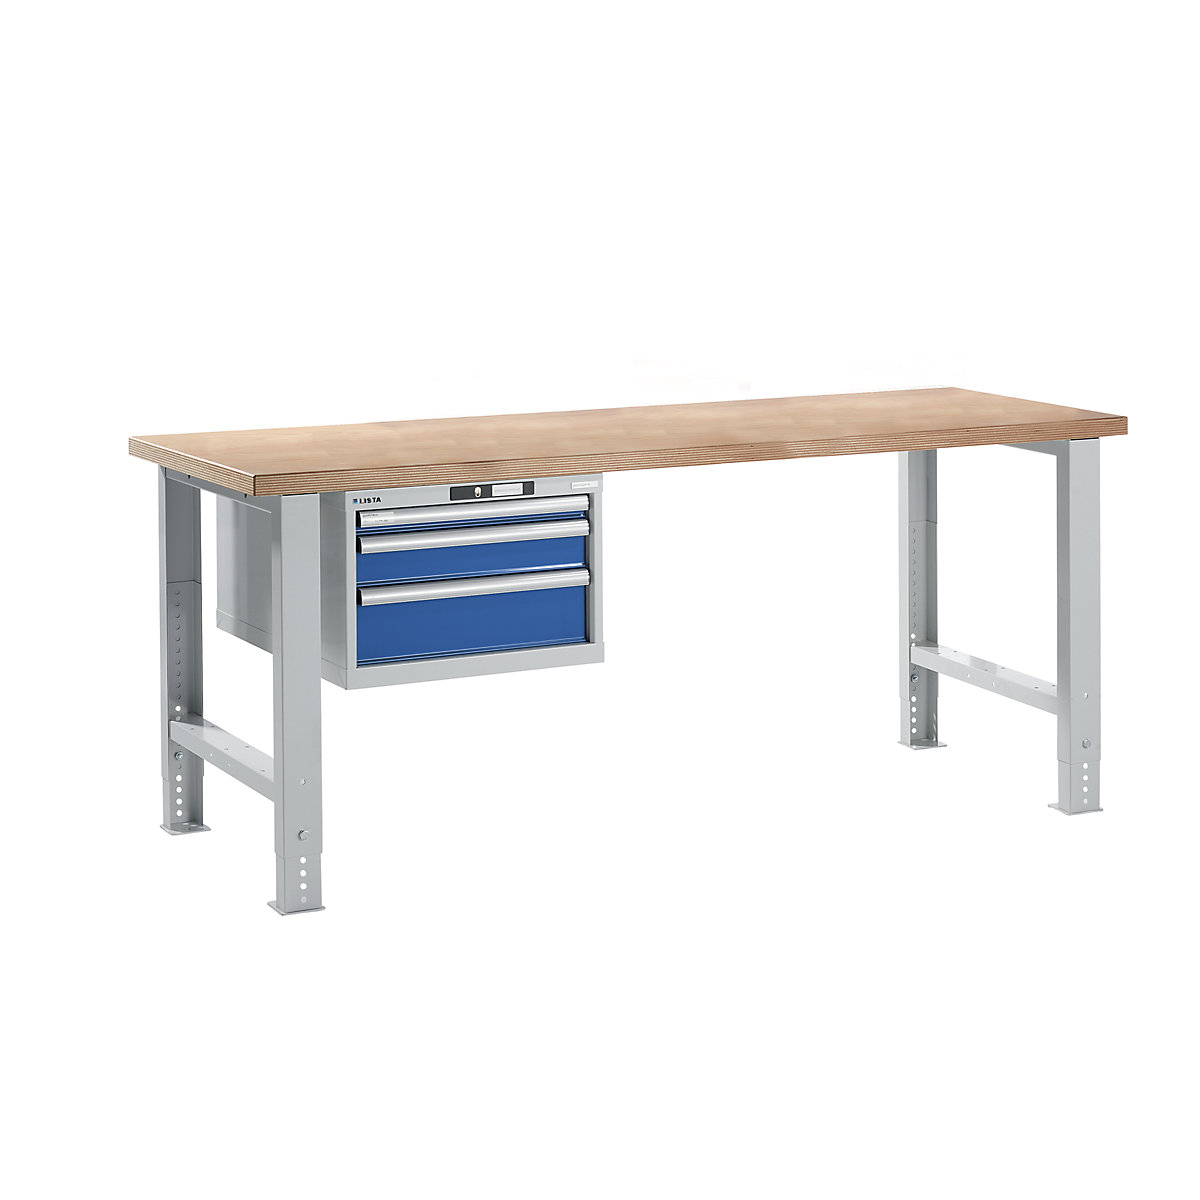 Modular workbench – LISTA, height 740 – 1090 mm, suspended drawer unit, 3 drawers, gentian blue, table width 2000 mm-6